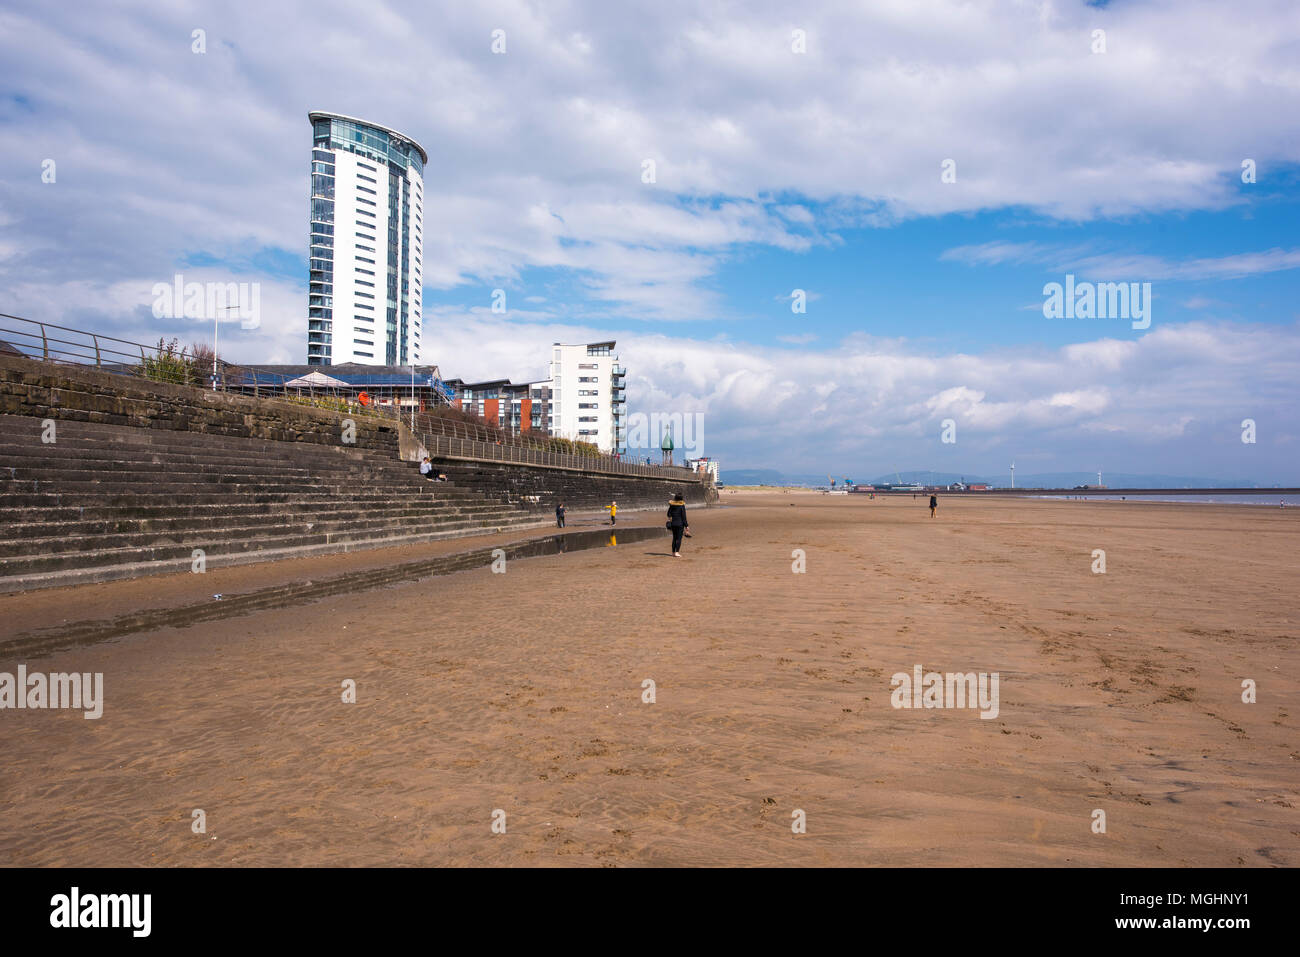 The Millenium Tower, Swansea, South Wales, UK Stock Photo